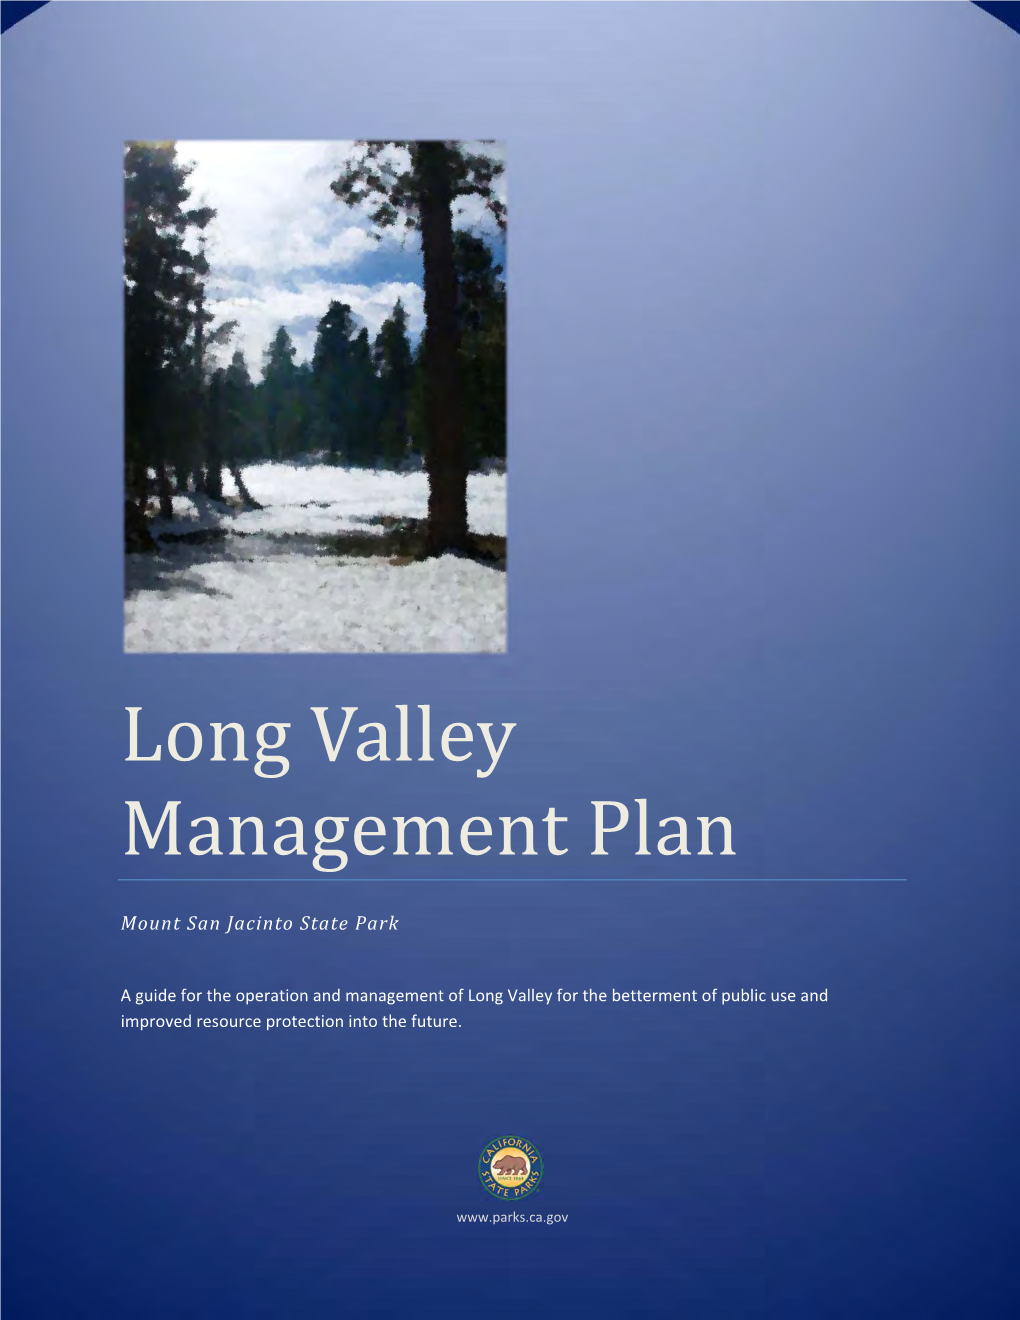 Long Valley Management Plan